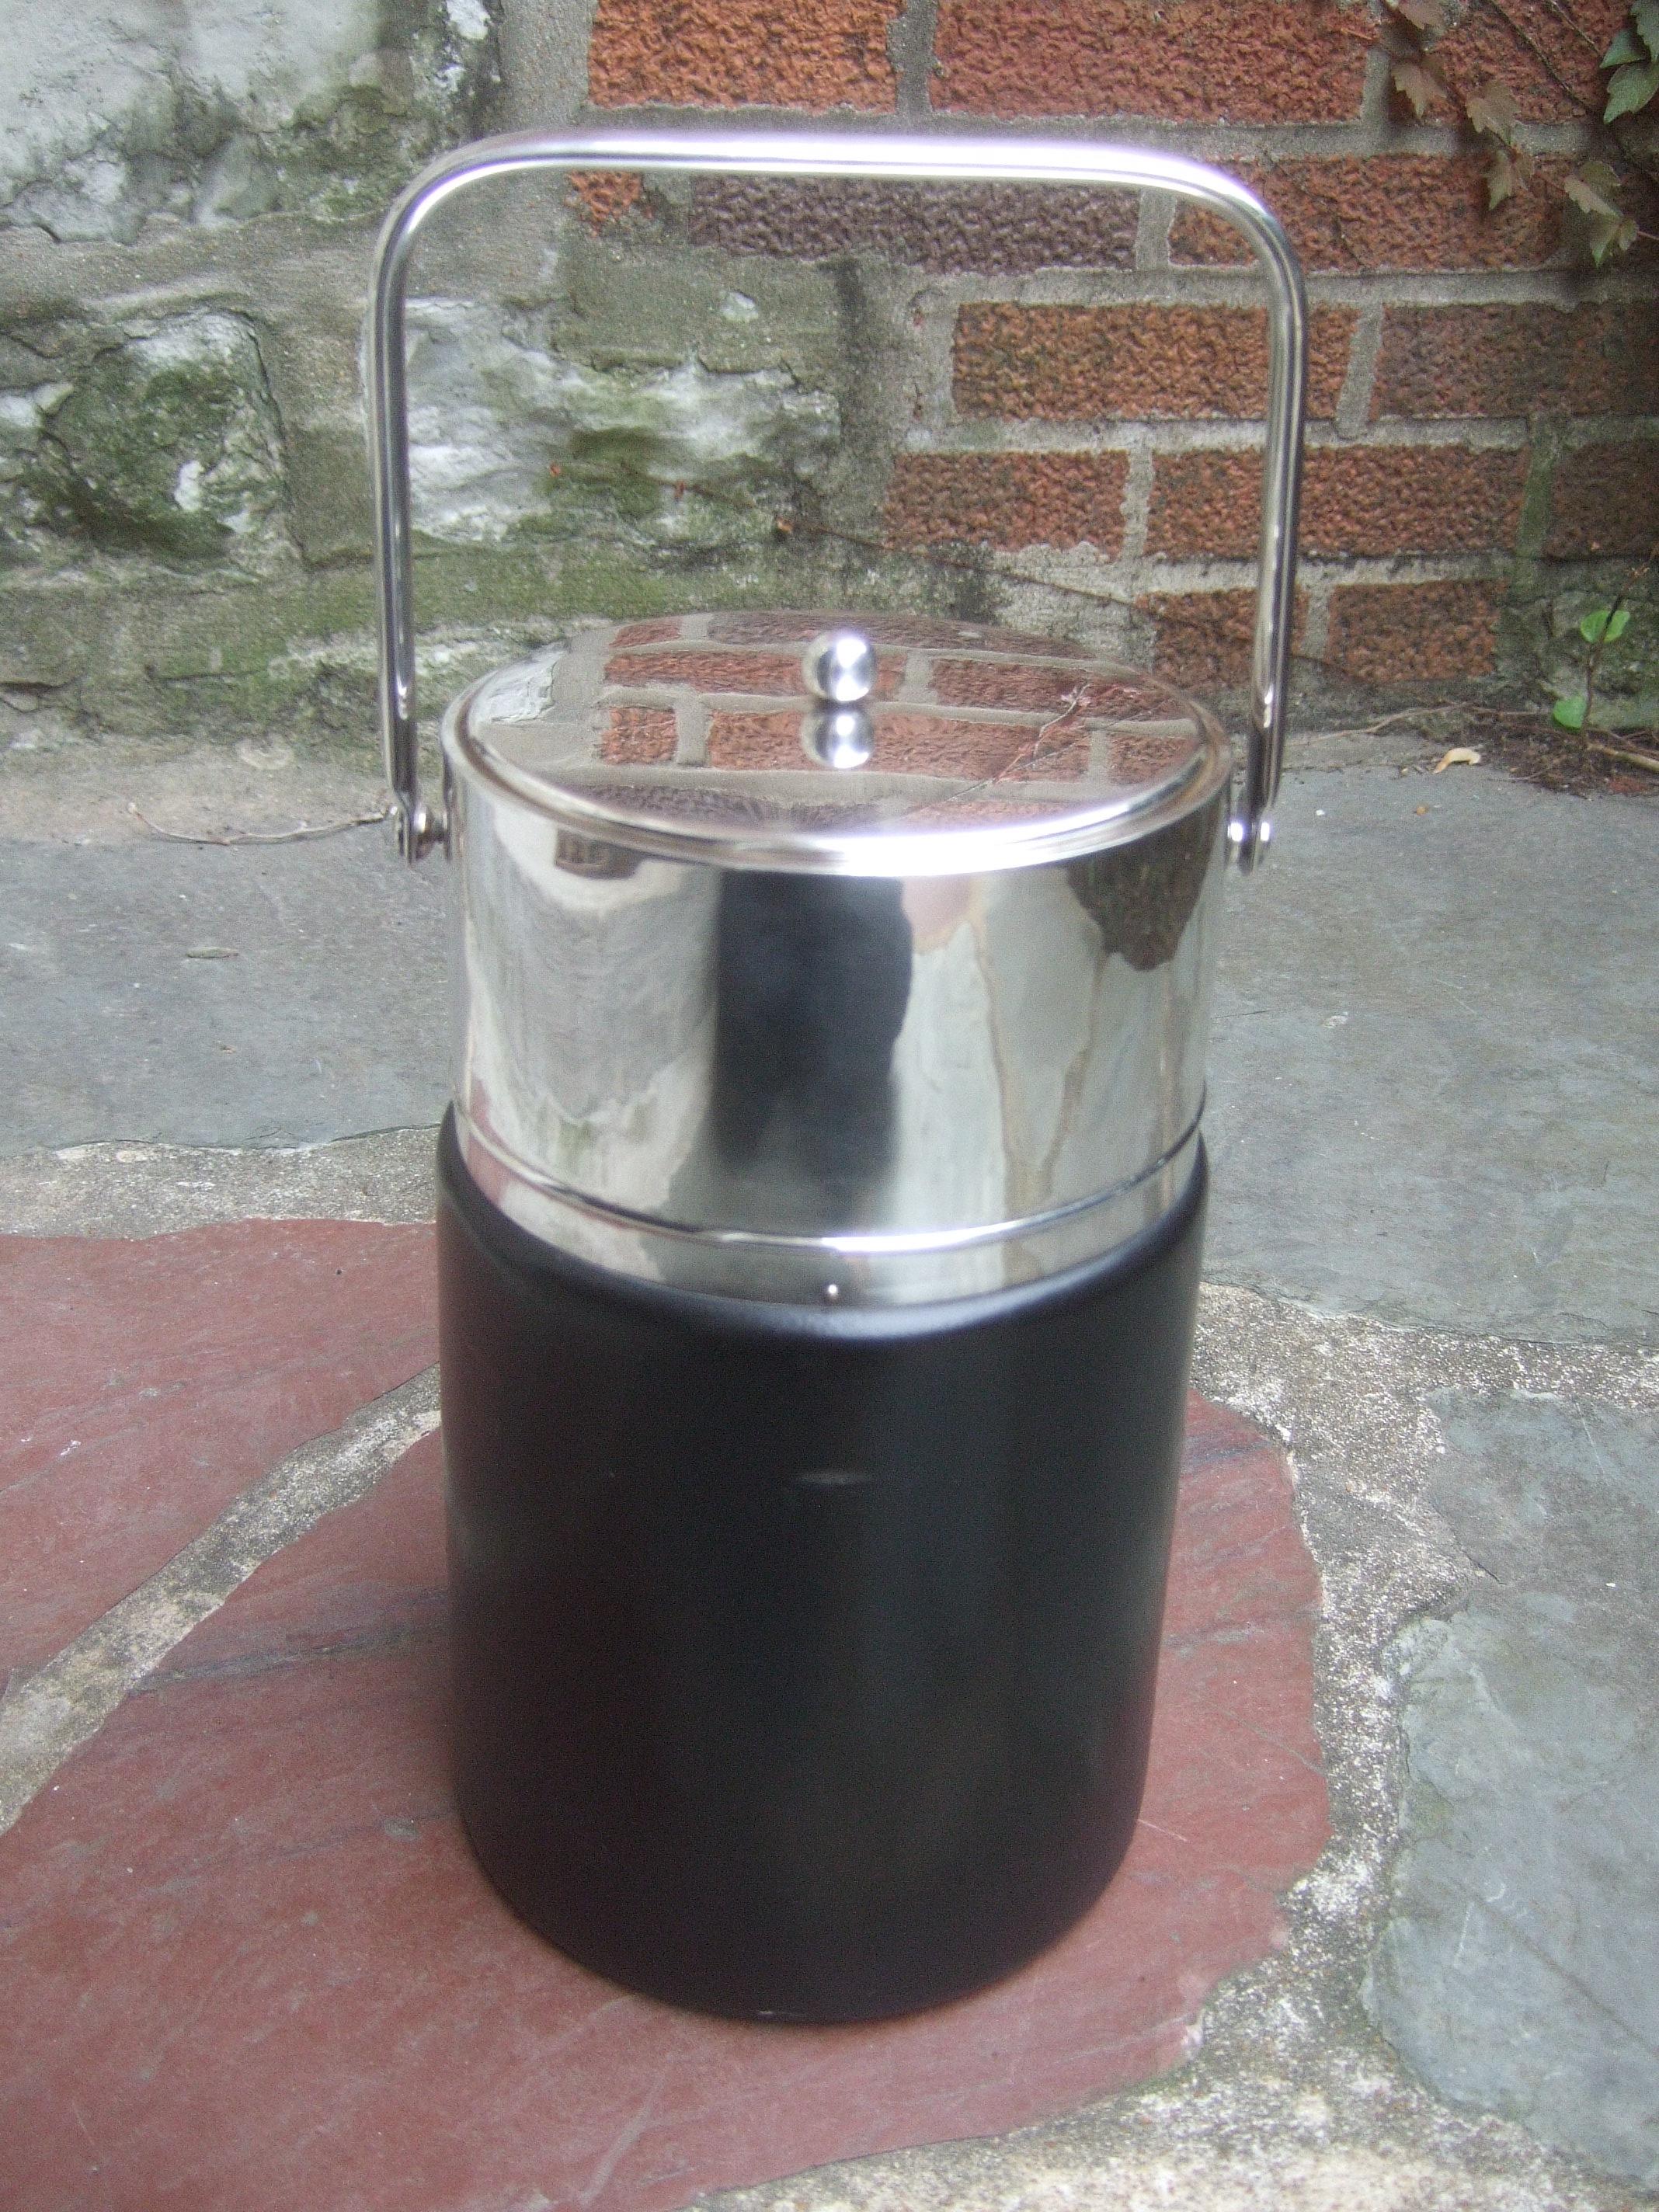 Gucci Italy Sleek chrome black leather ice bucket c 1970s 
The stylish Italian ice bucket is designed with a chrome metal lid, swivel handle and a wide chrome band that circles the upper section of the ice bucket

The mid-section and lower section